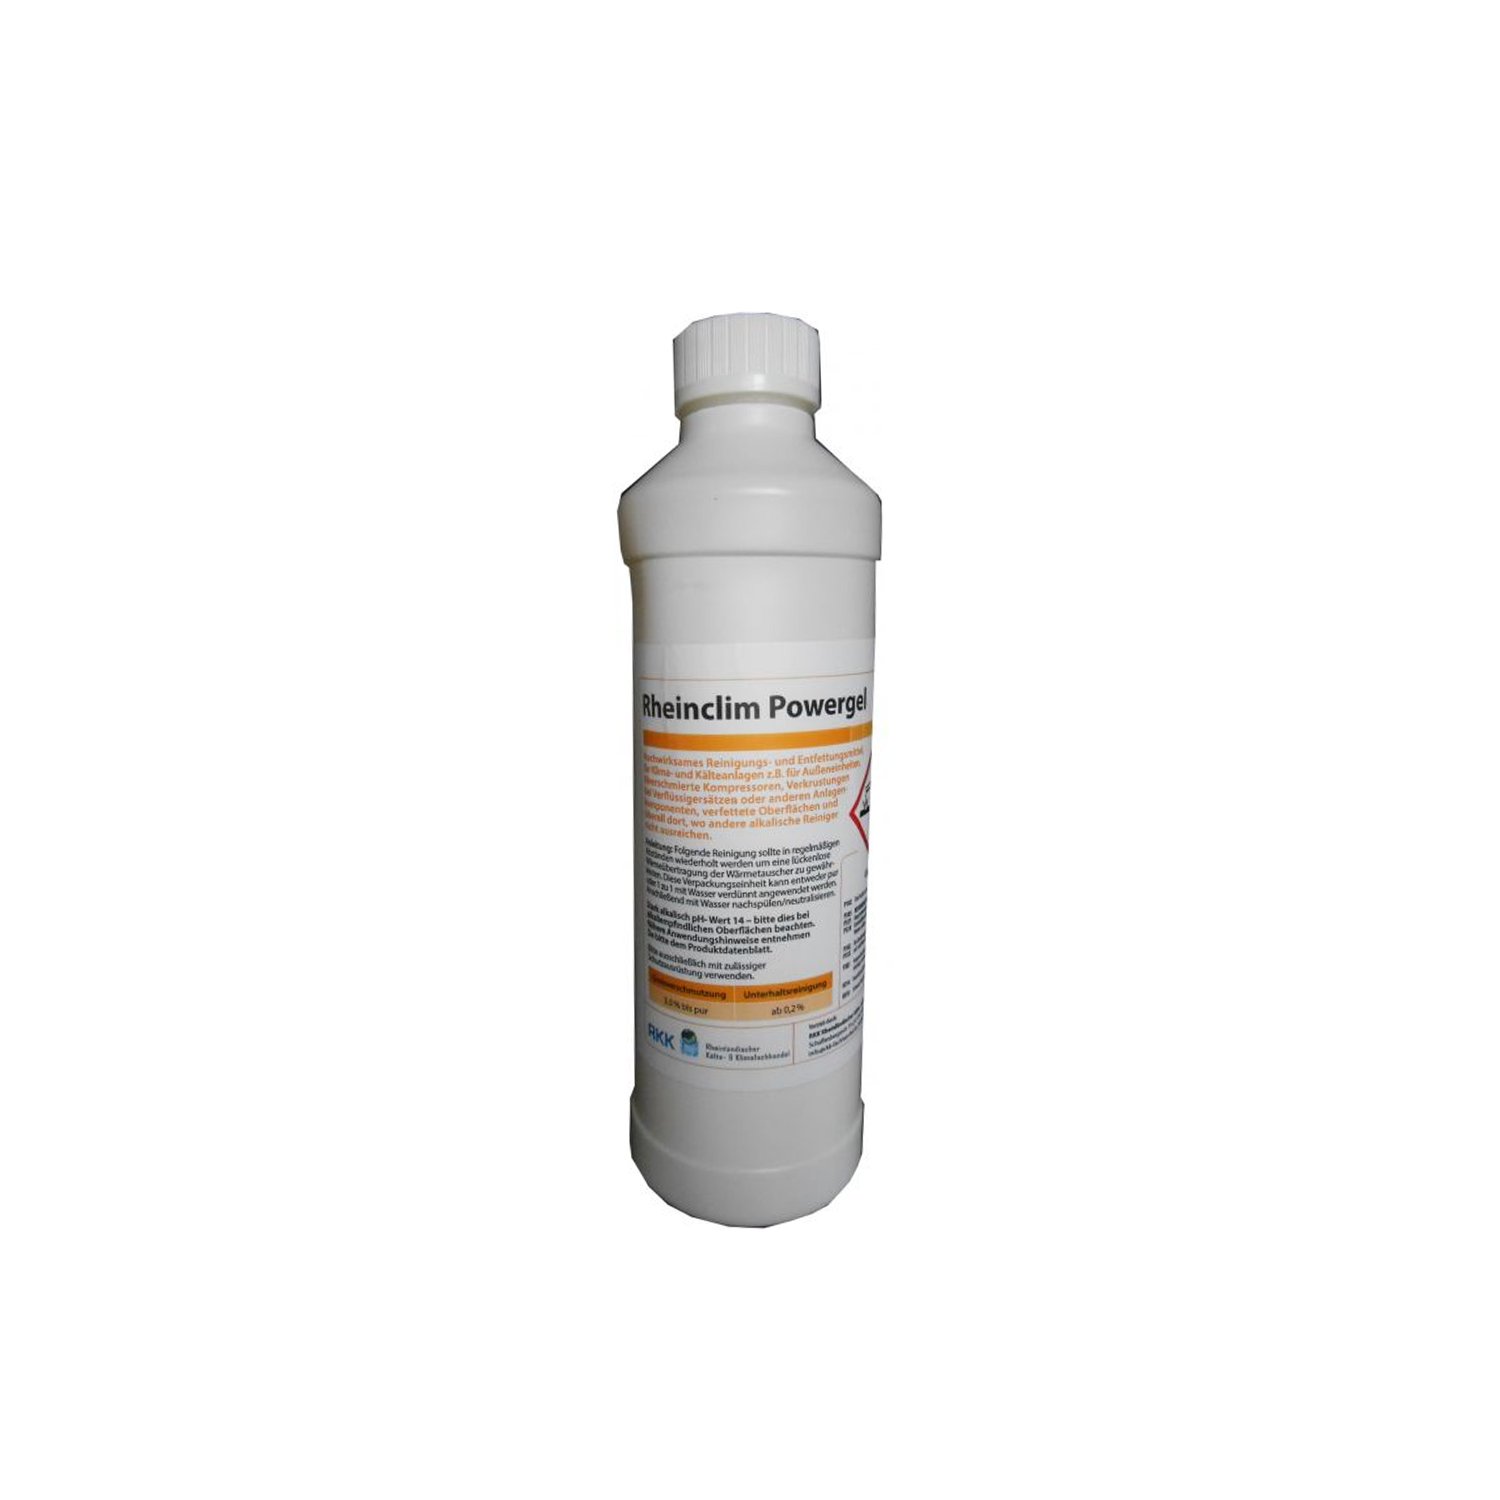 Rheinclim Powergel, 5 L concentrate for outdoor units